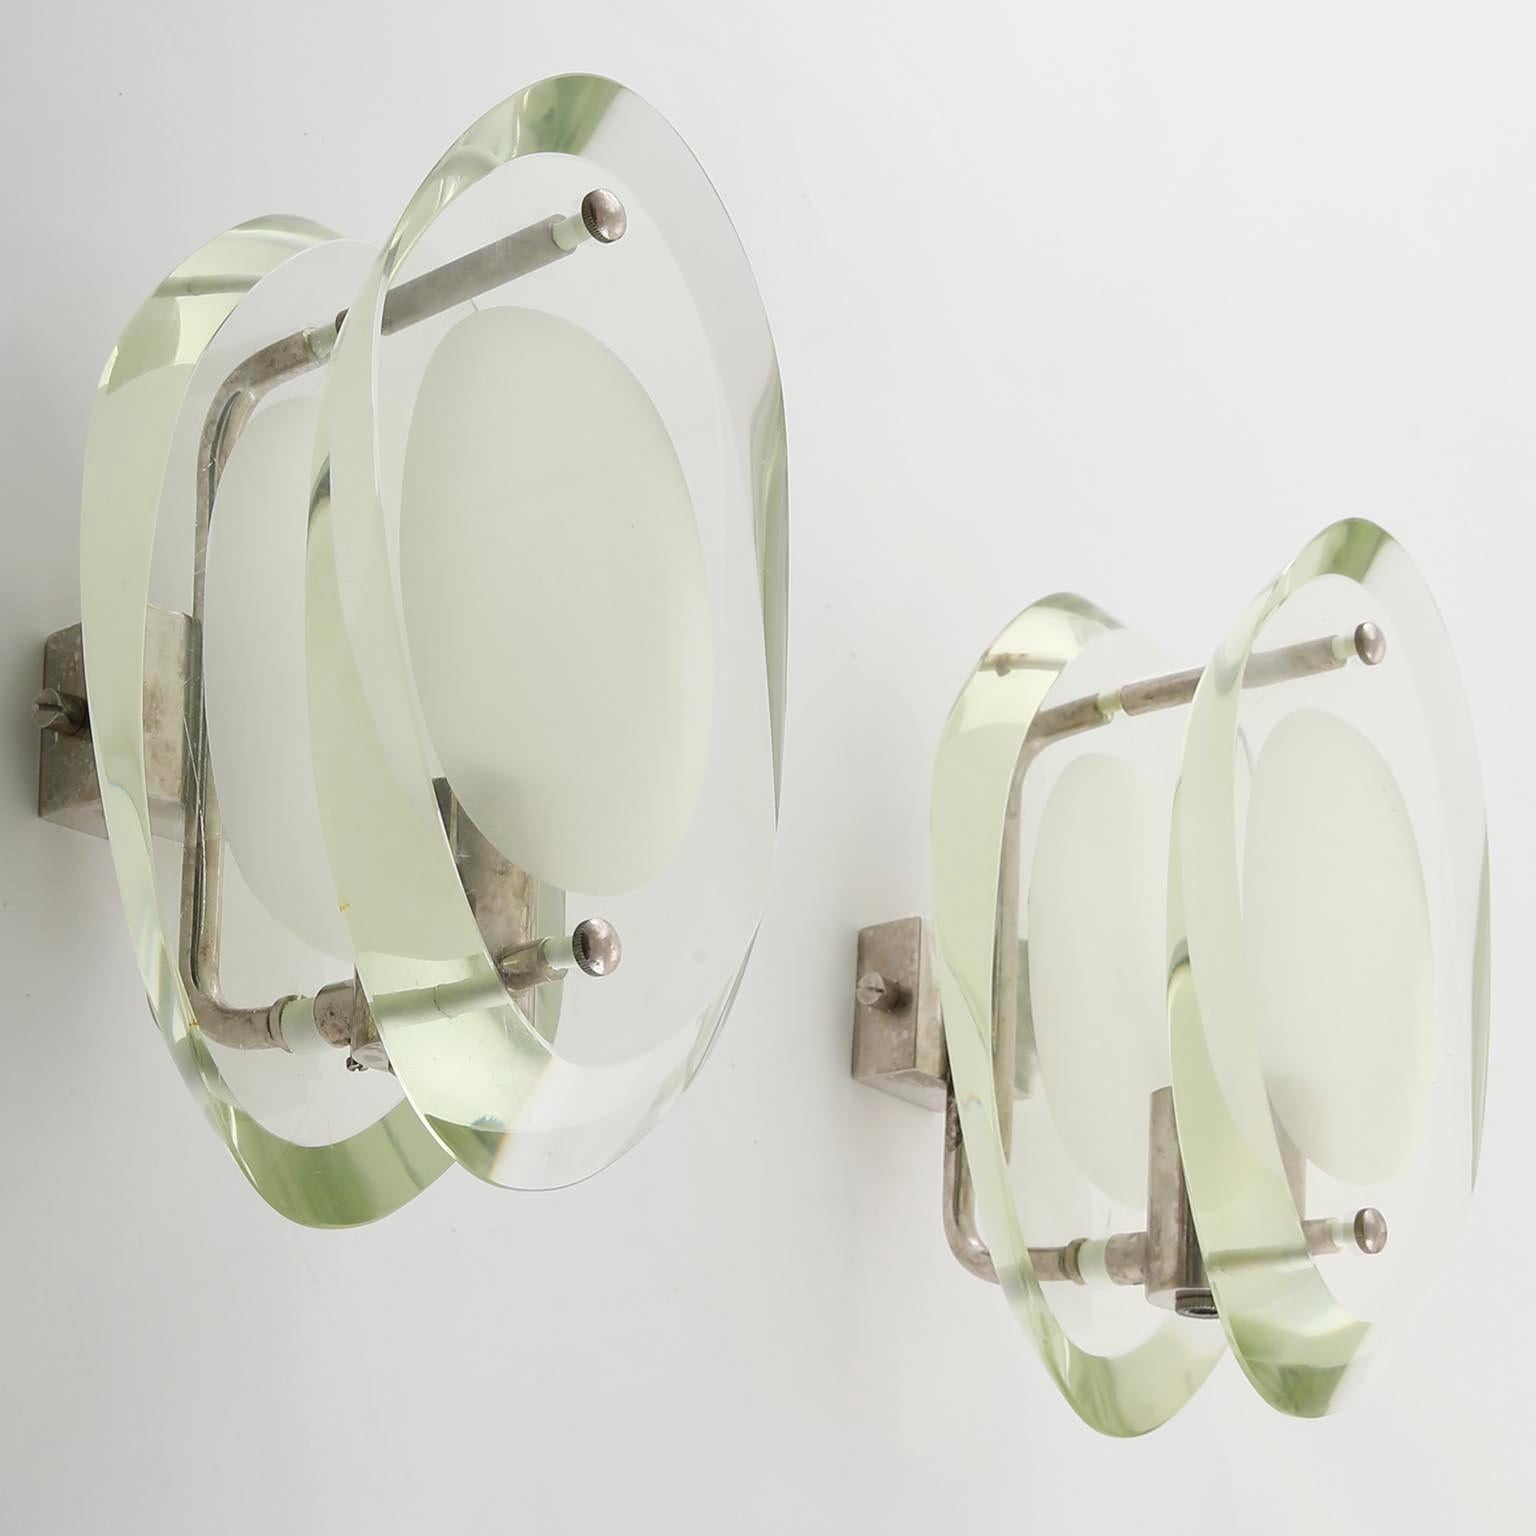 A pair of wall lights, model 'Micro' no. 2093 designed by French designer Max Ingrand for Fontana Arte, Italy, manufactured in midcentury, circa 1960.
A nickelled brass frame with patina and holds two organically shaped, partially frosted clear